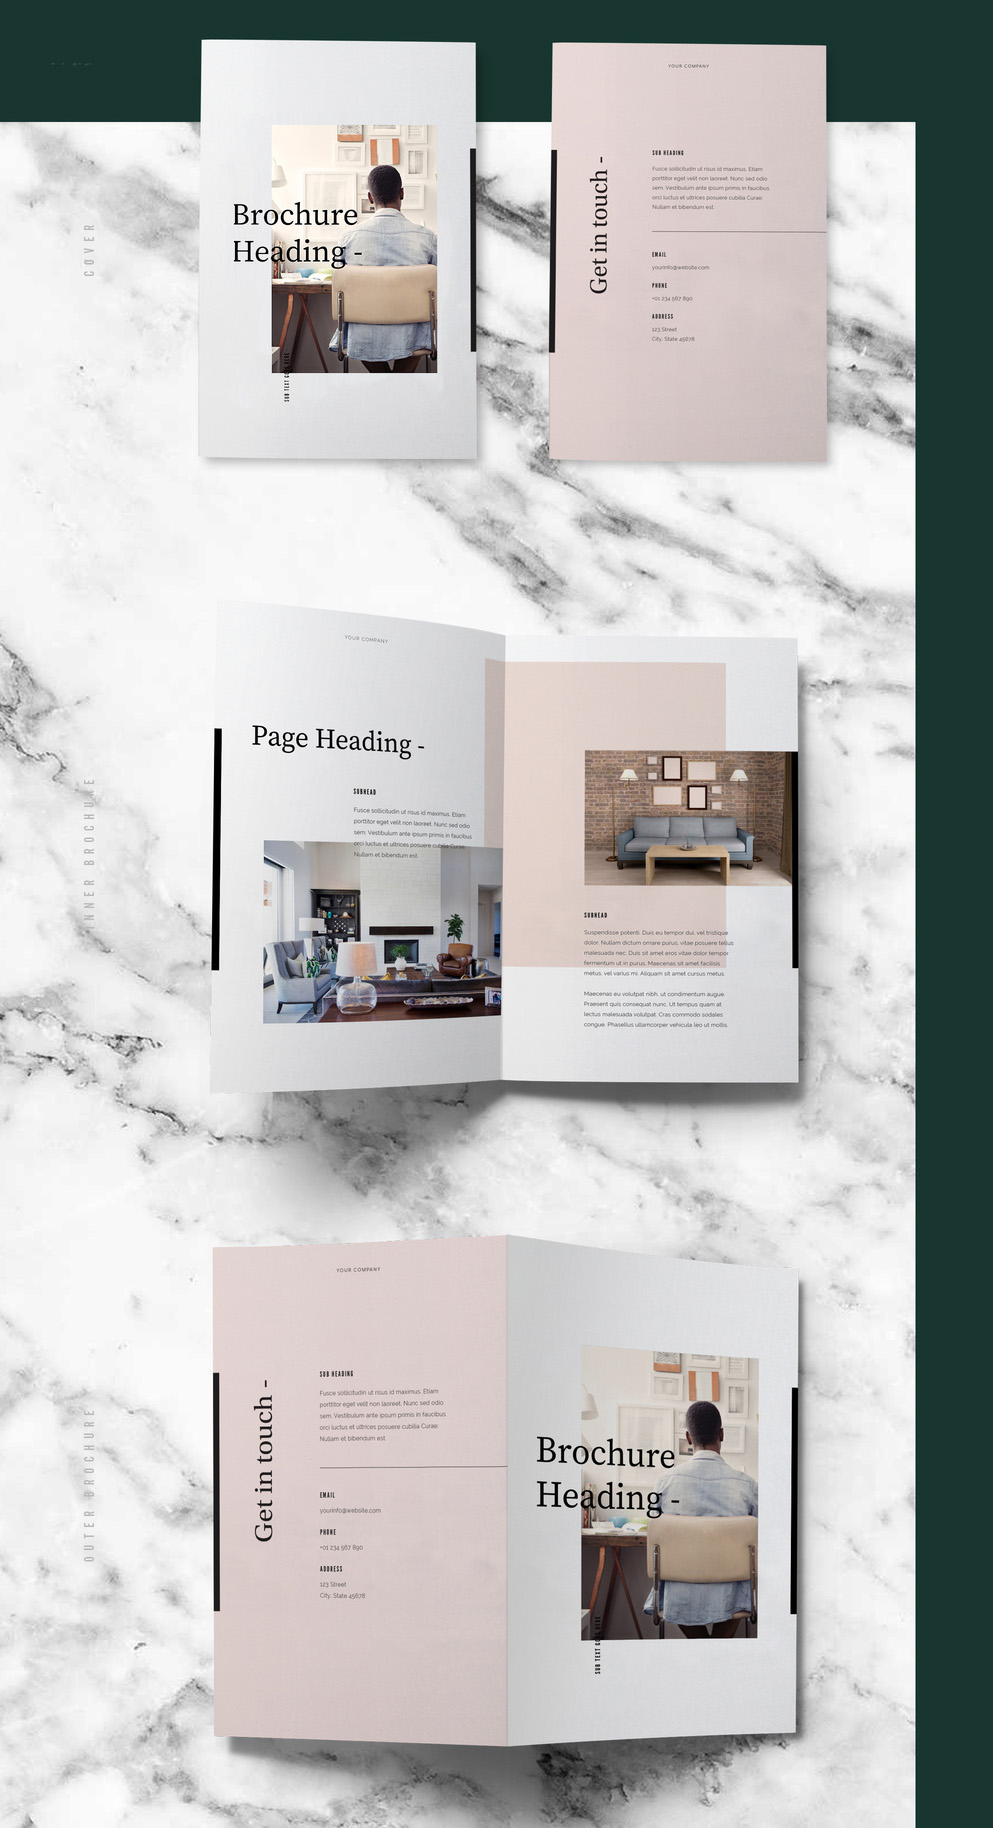 Free Brochure Template for Adobe InDesign (INDD Format)